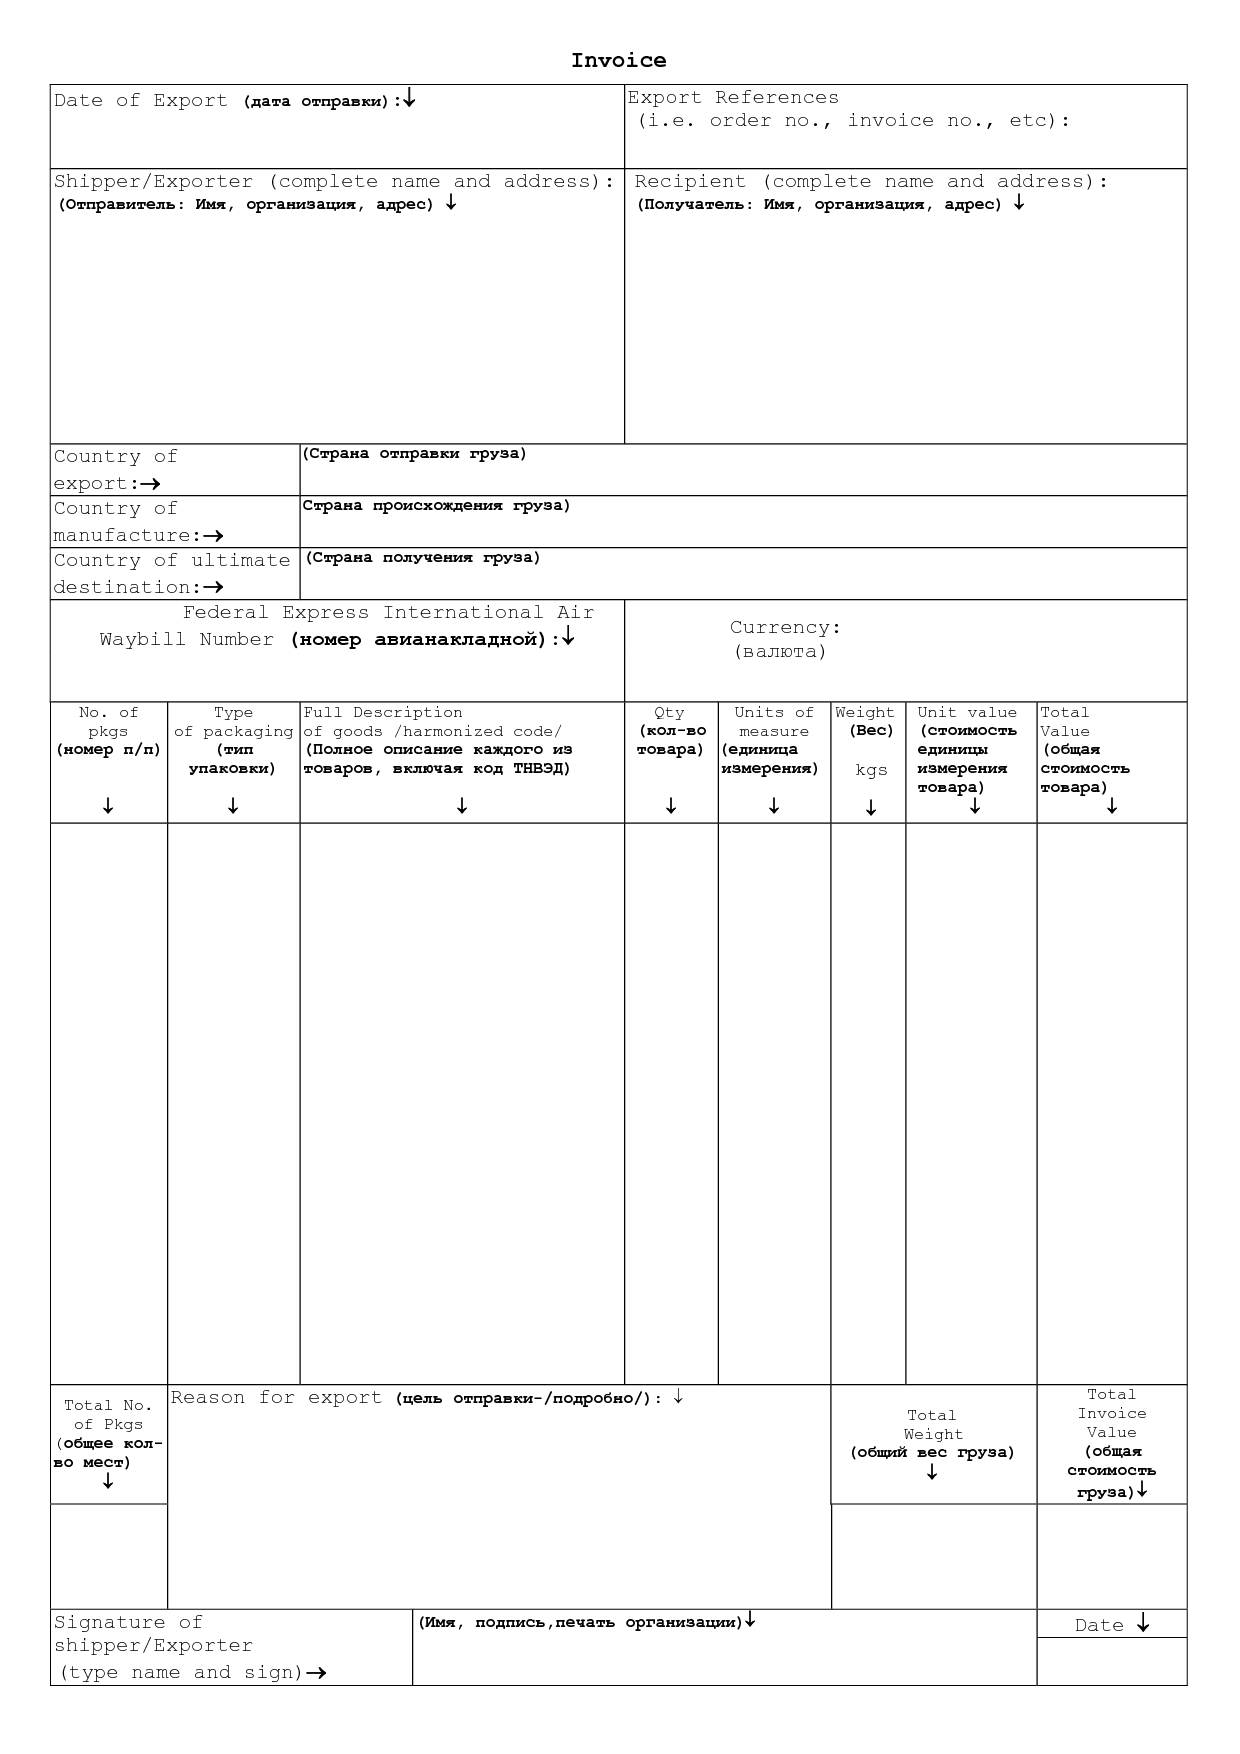 fedex commercial invoice blank